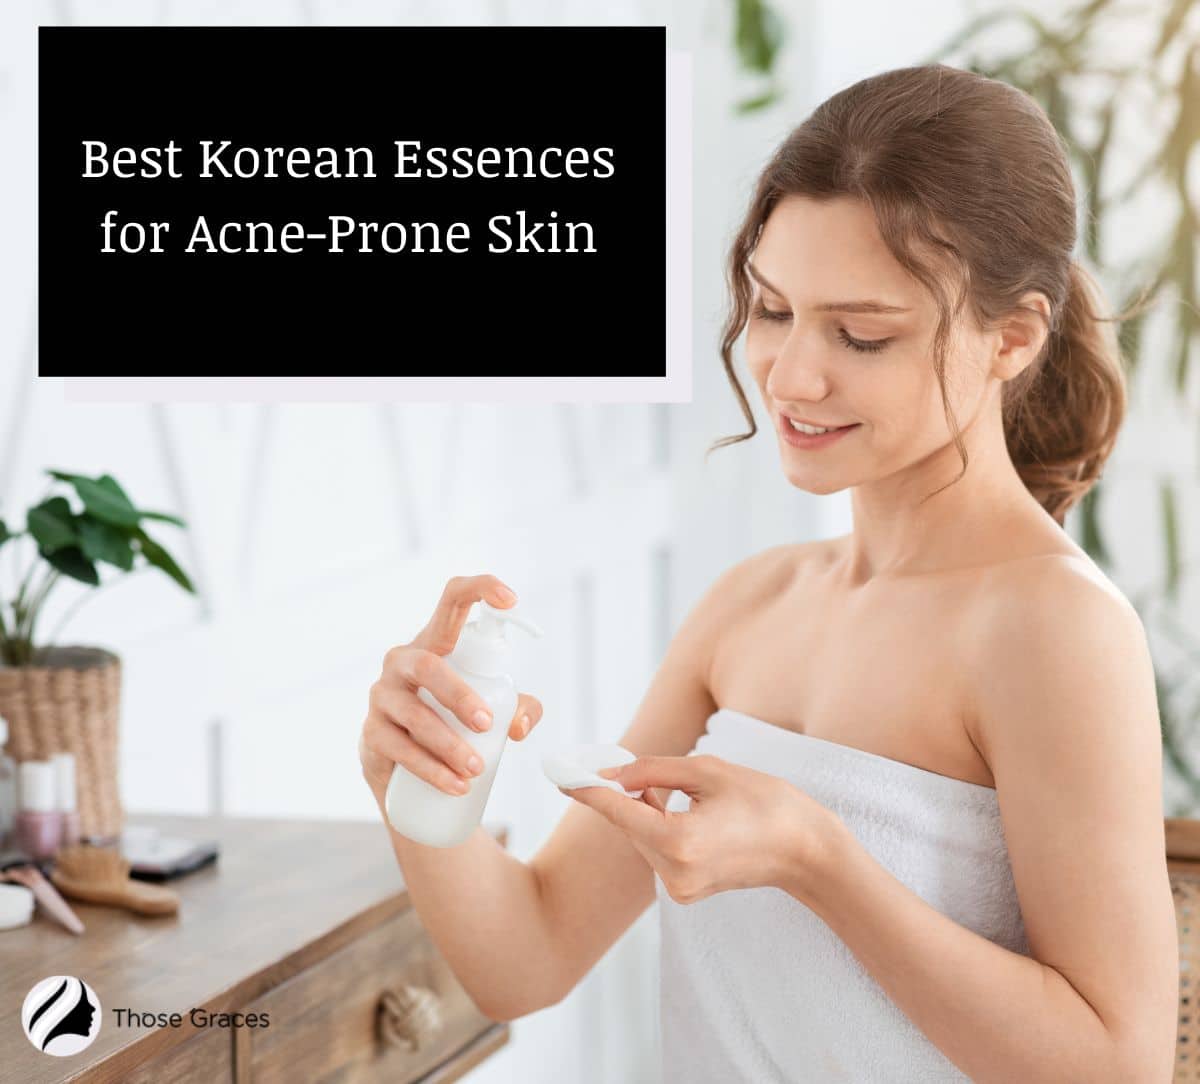 lady using the best korean essences for acne-prone skin